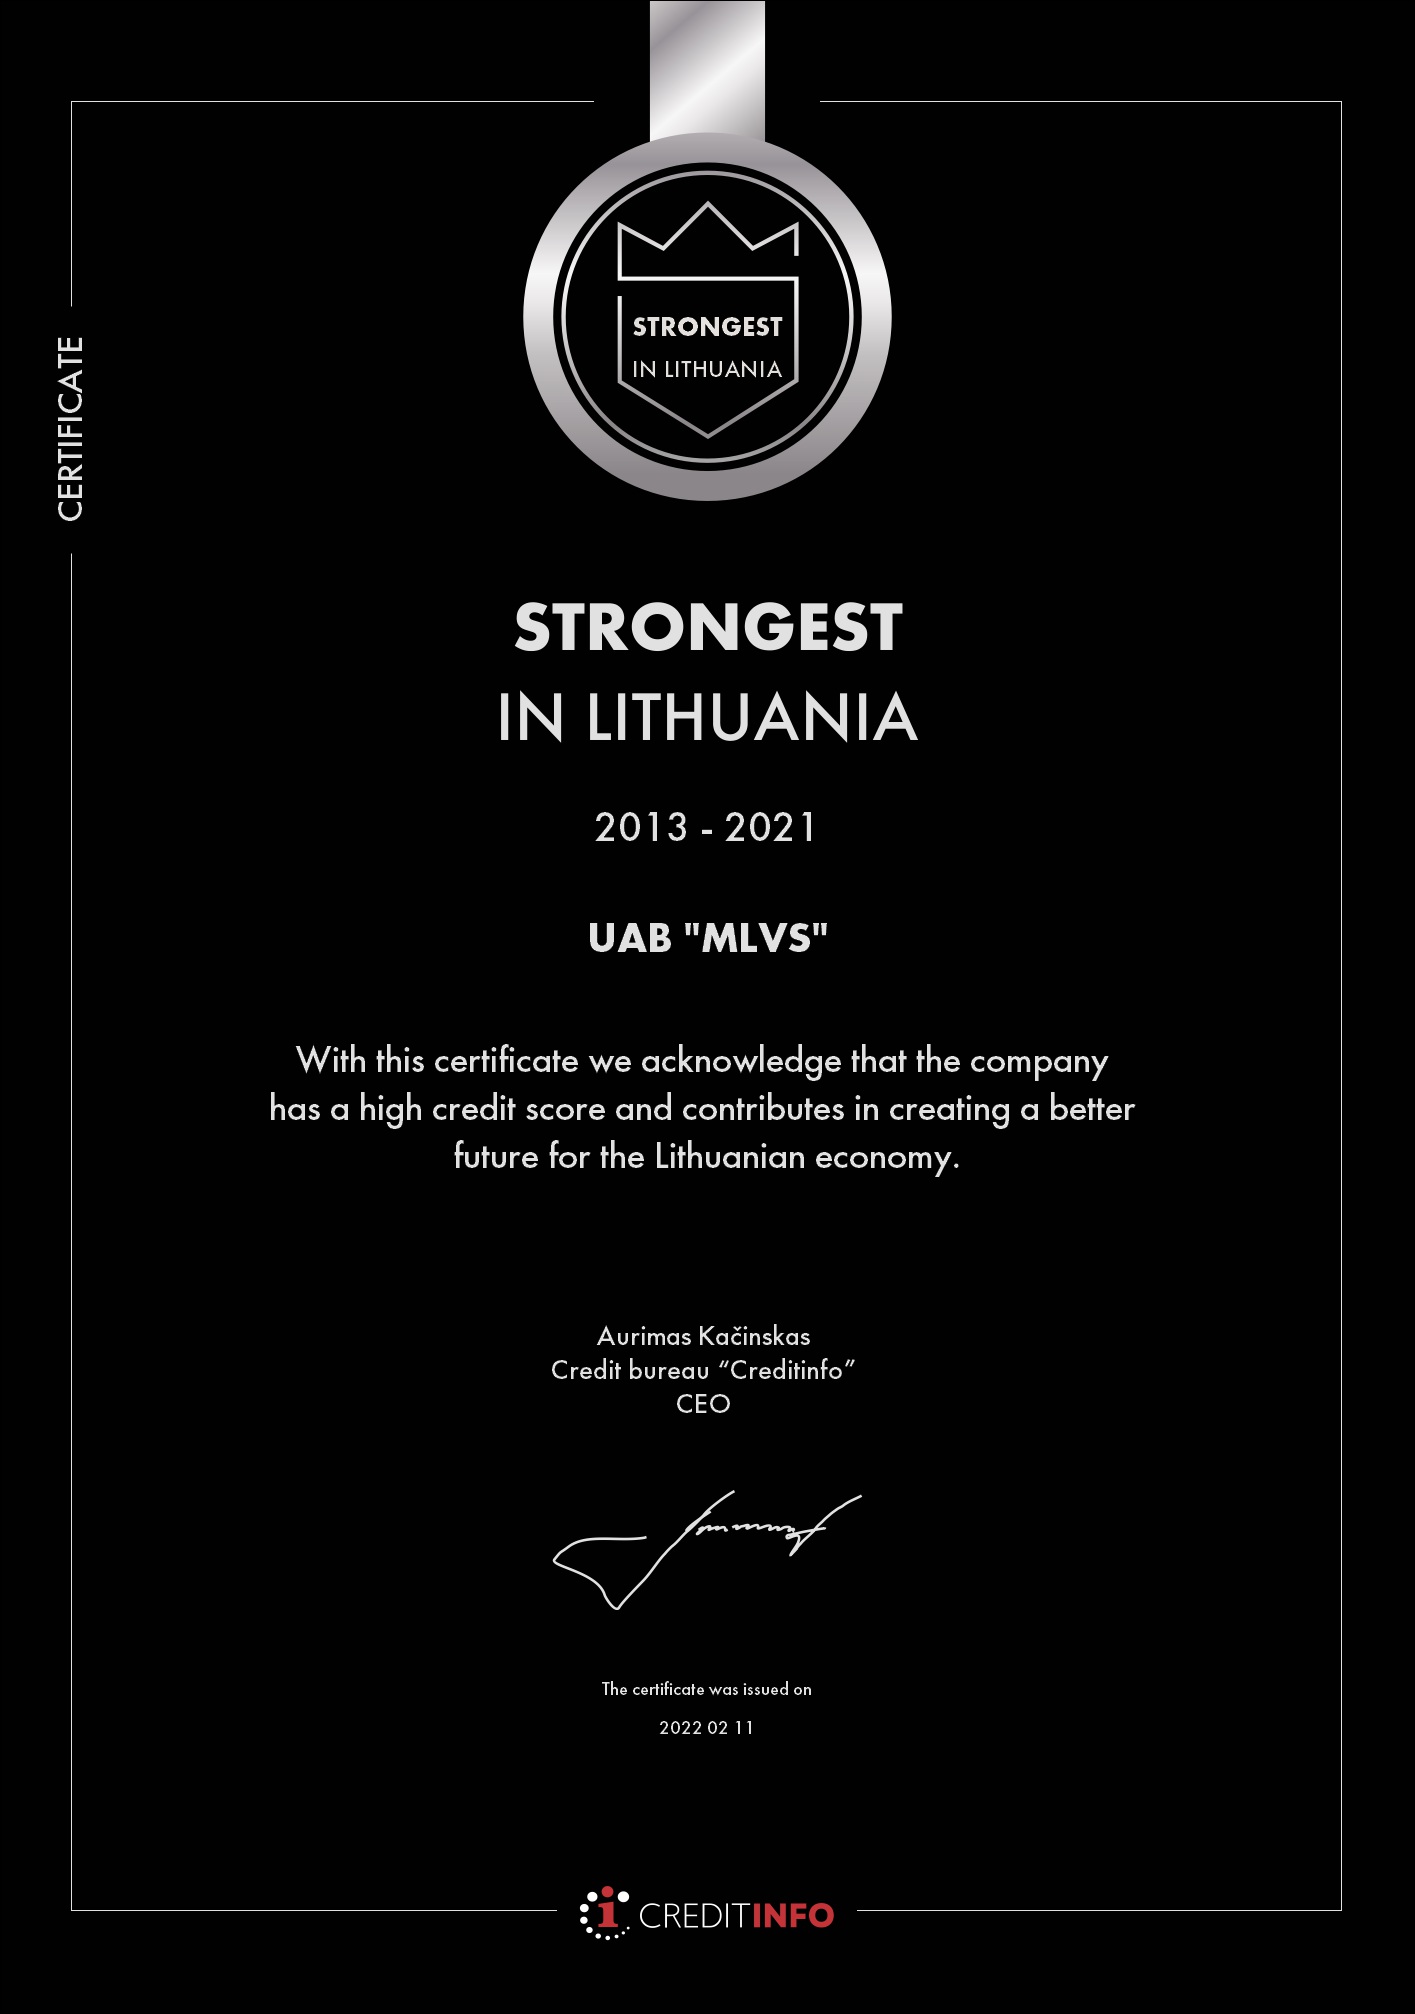 Strongest in Lithuania 2013-2021